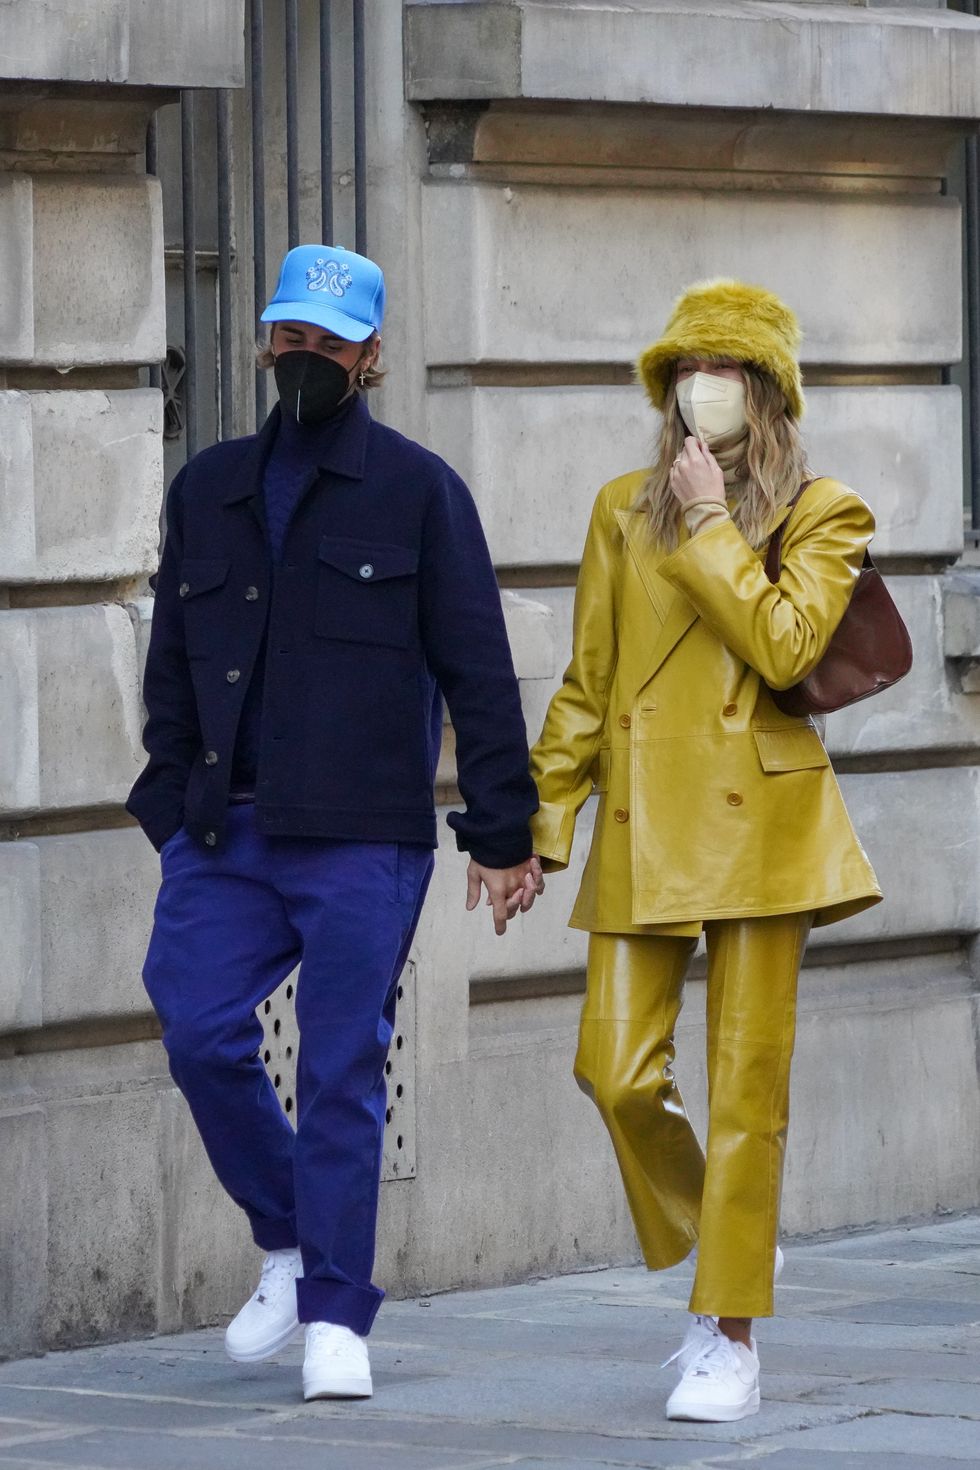 paris, france february 28 singer justin bieber and wife hailey baldwin bieber are seen strolling near les invalides on february 28, 2021 in paris, france photo by marc piaseckigc images